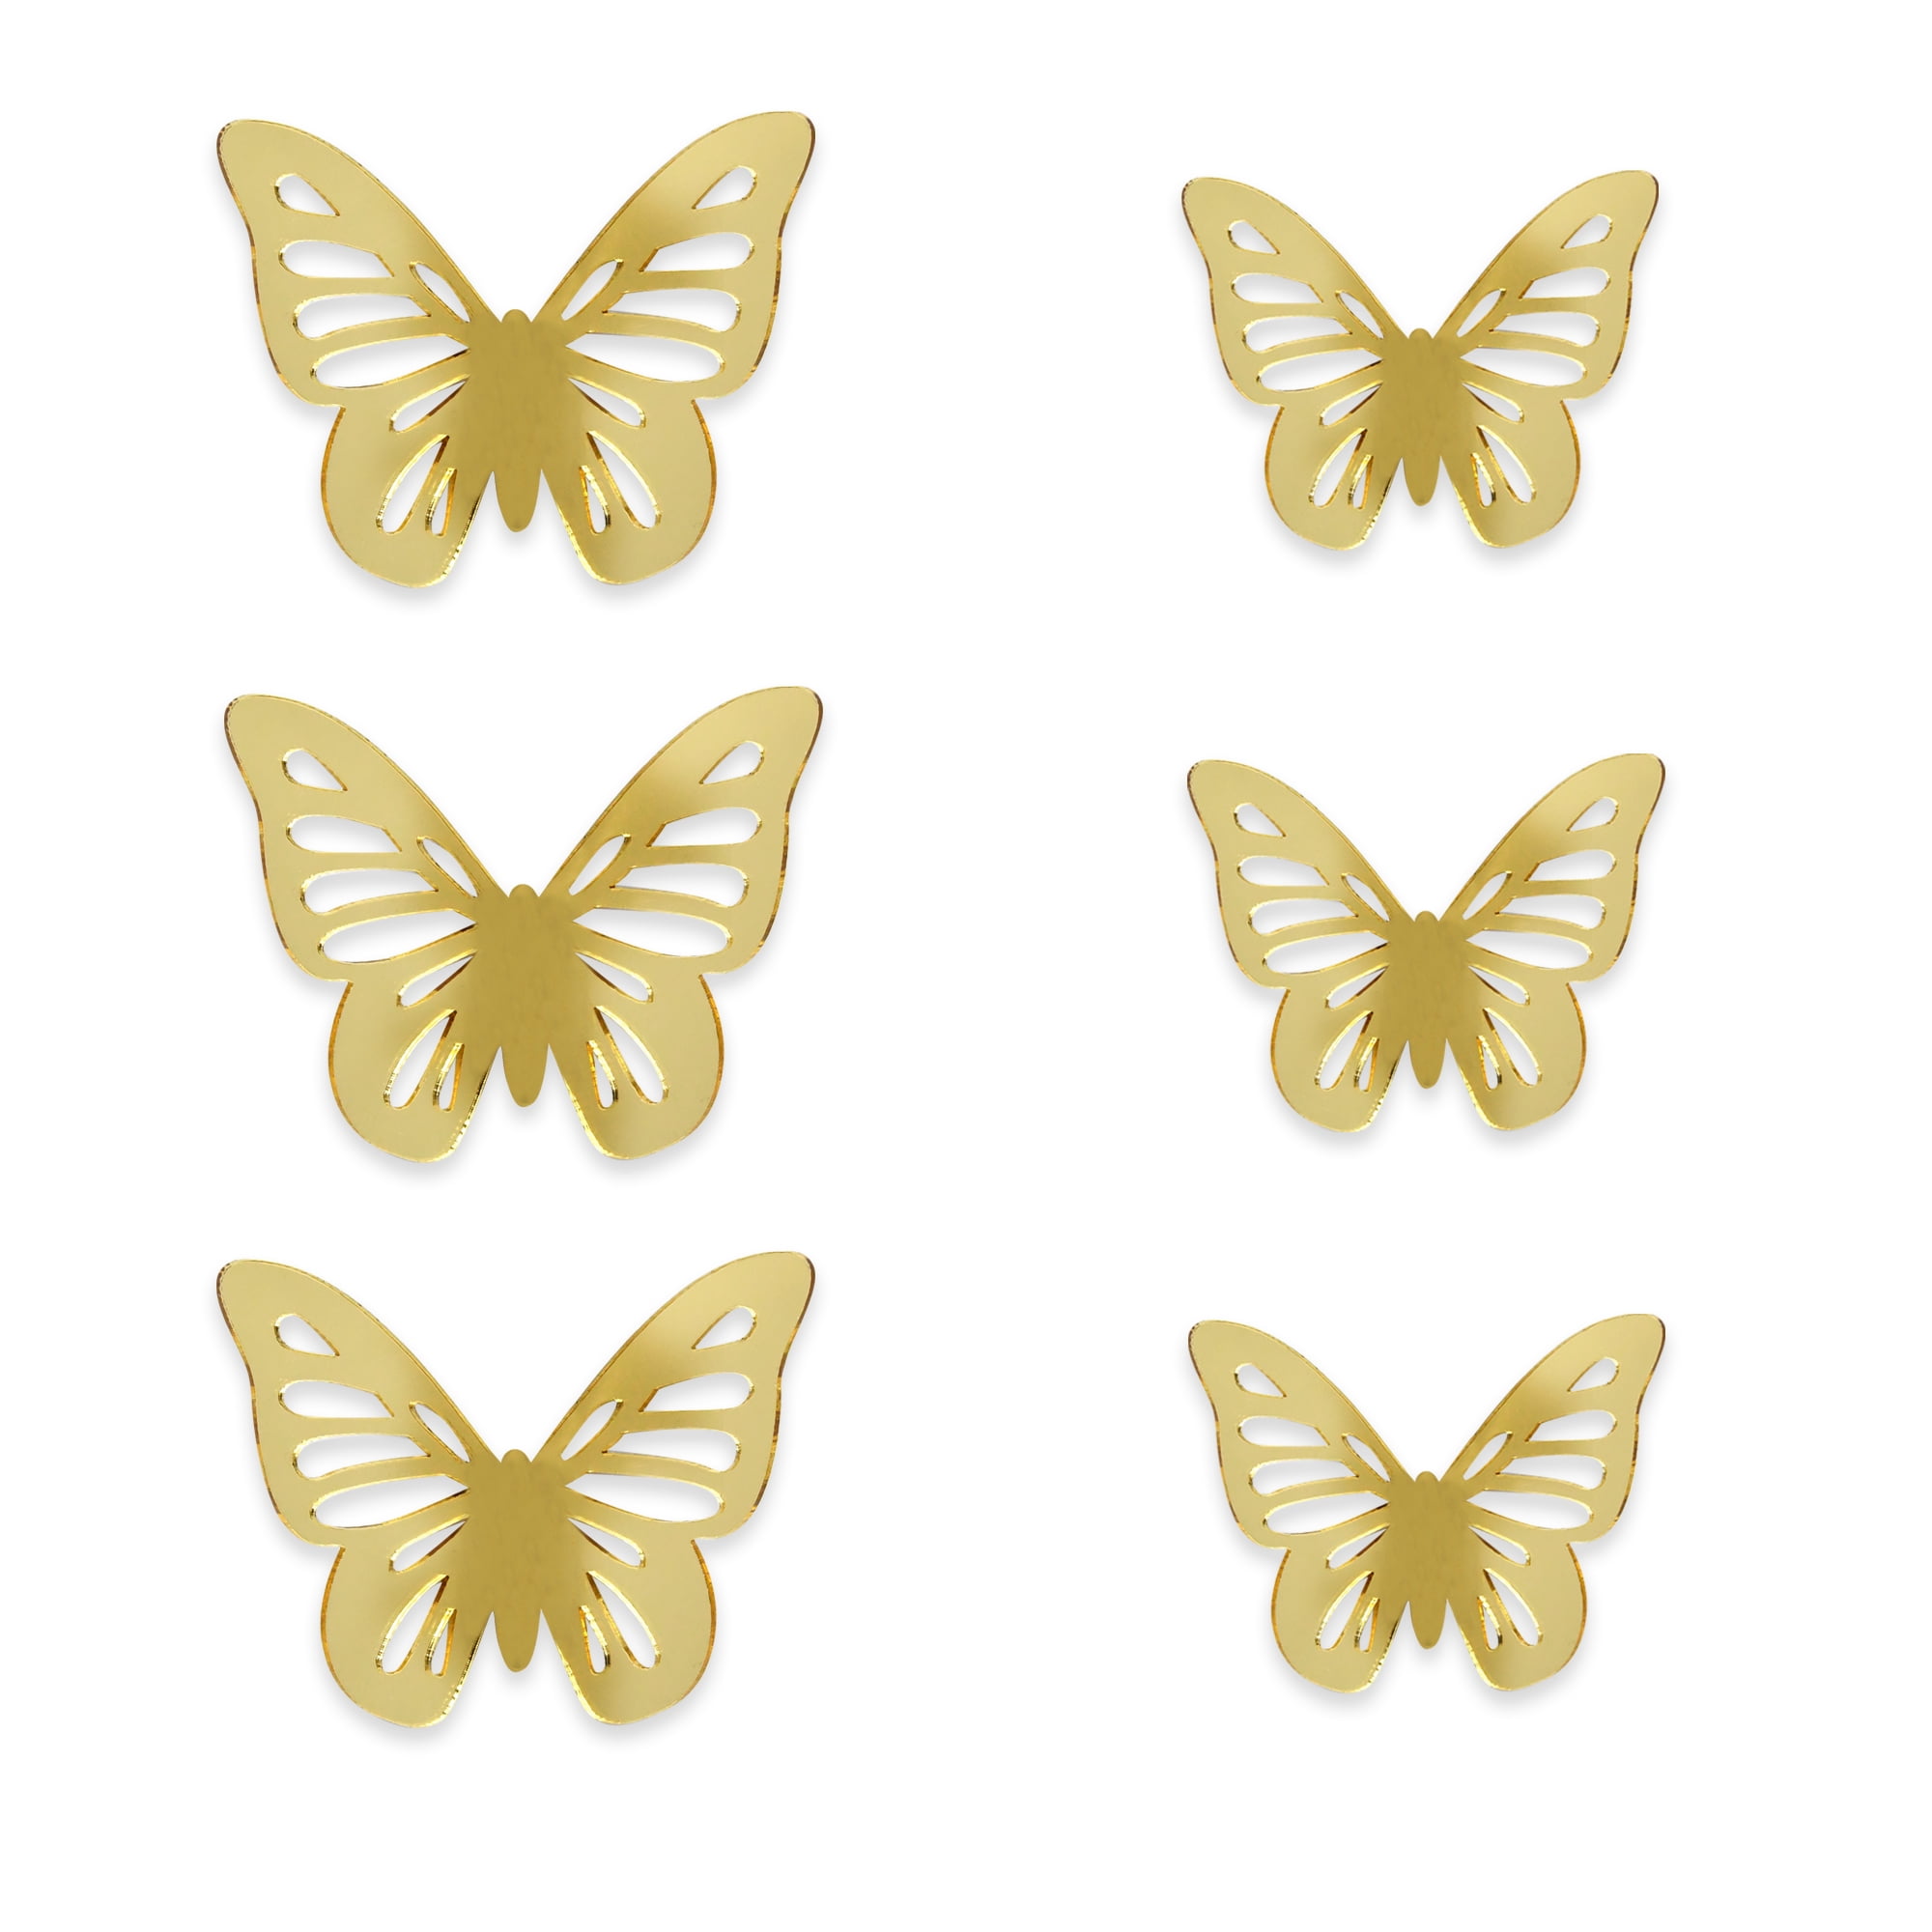 Blue Moon Studio 6pc Peel and Stick Self-Adhesive Gold 3D Butterfly Wall Mirror Decals